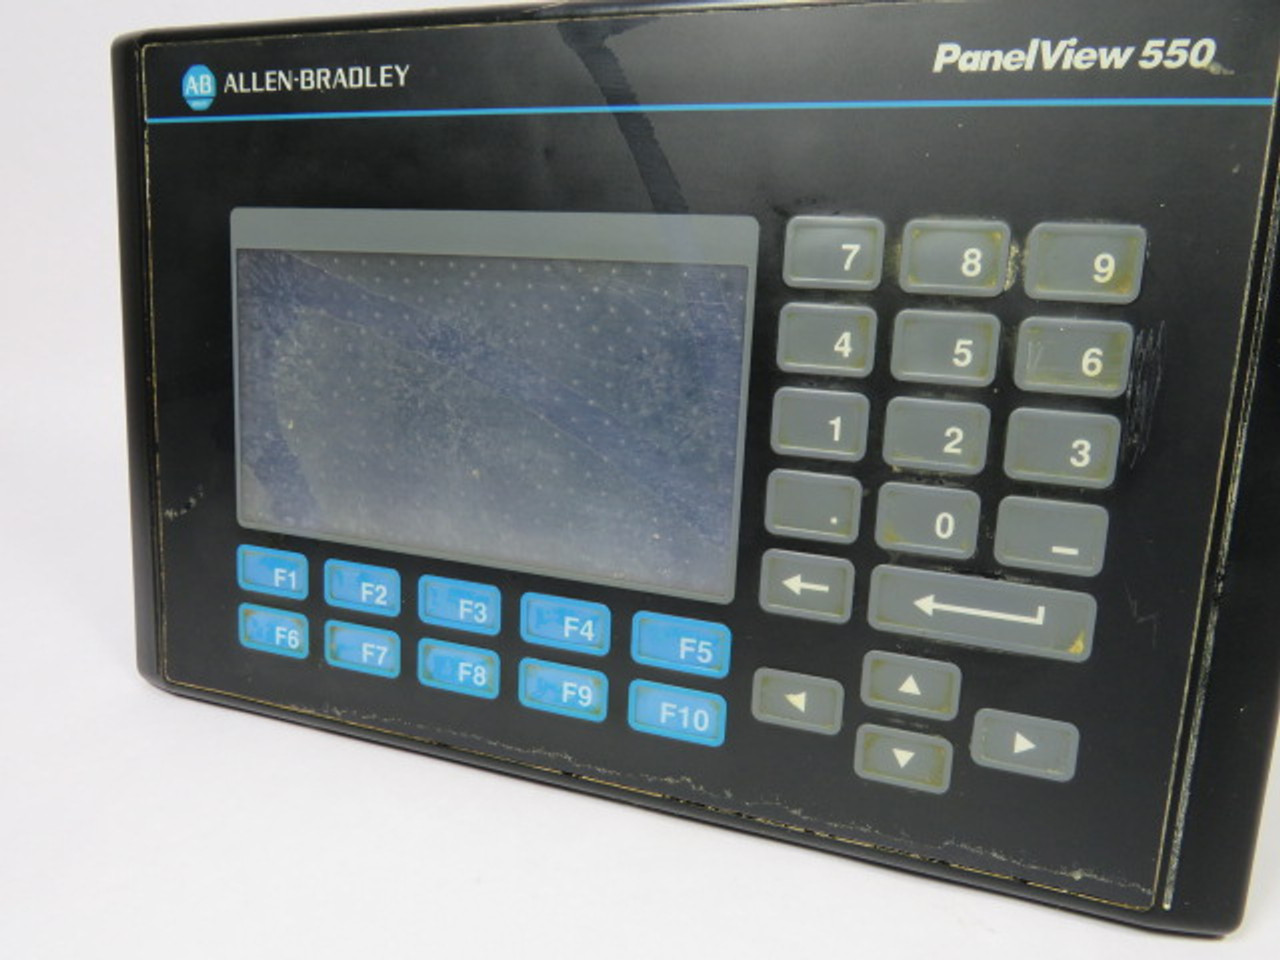 Allen-Bradley 2711-B5A1 Series F Panelview 550 Touch Screen & Keypad ! AS IS !